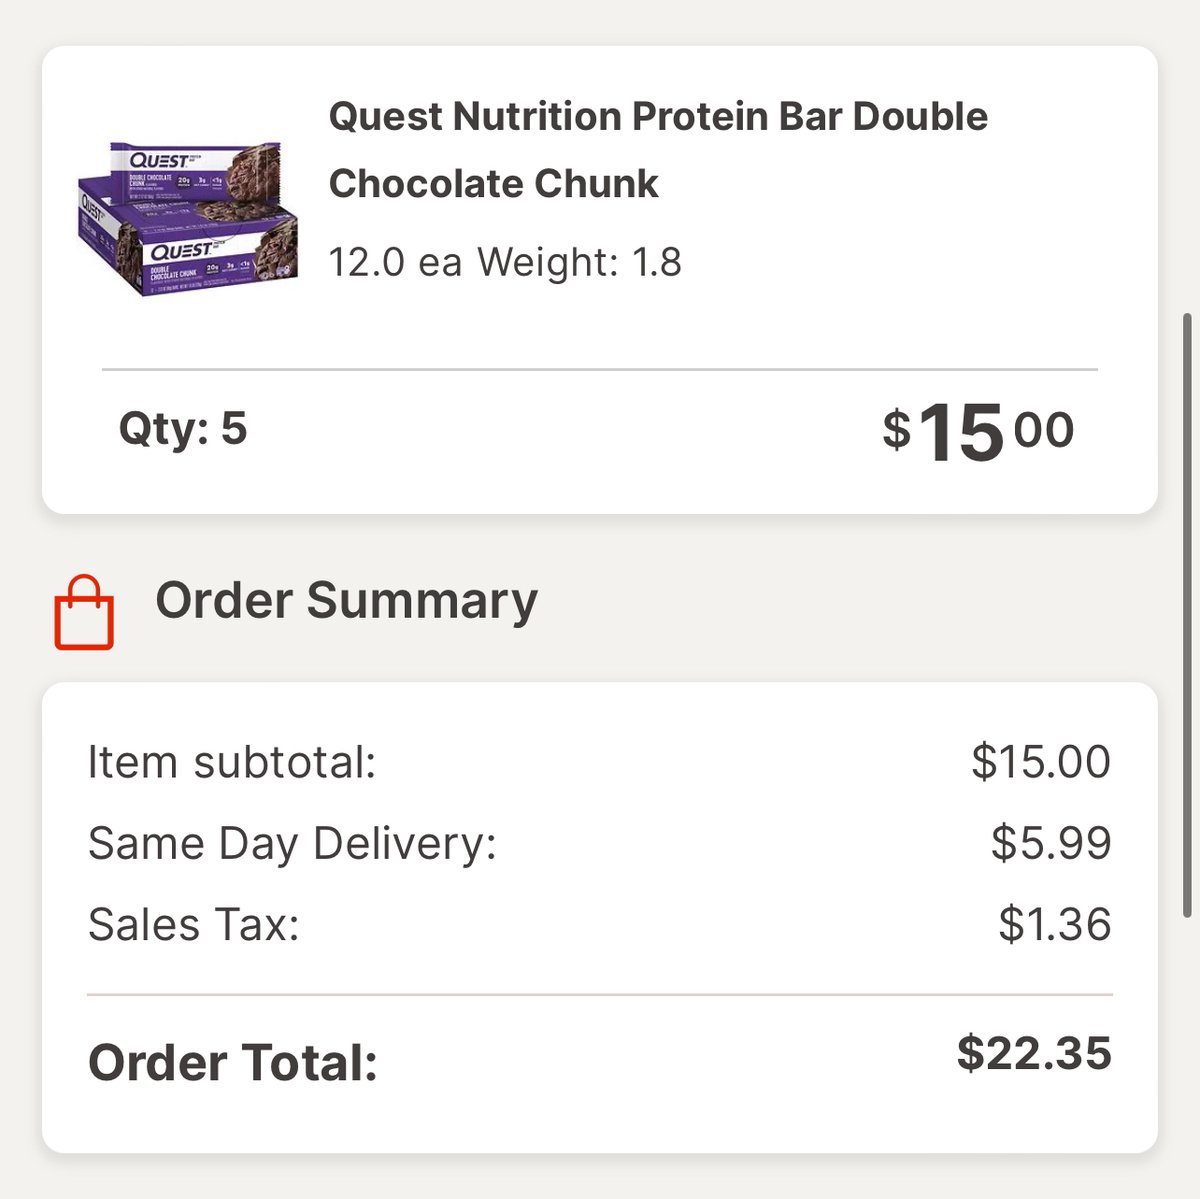 QUEST PROTEIN BARS FOR $3/BOX 🍫 Walgreens JUST glitched👇 12 qt boxes for only $3. Some users have already received shipping. We alert, you profit. 🤑 Who wants to join our exclusive community for free?